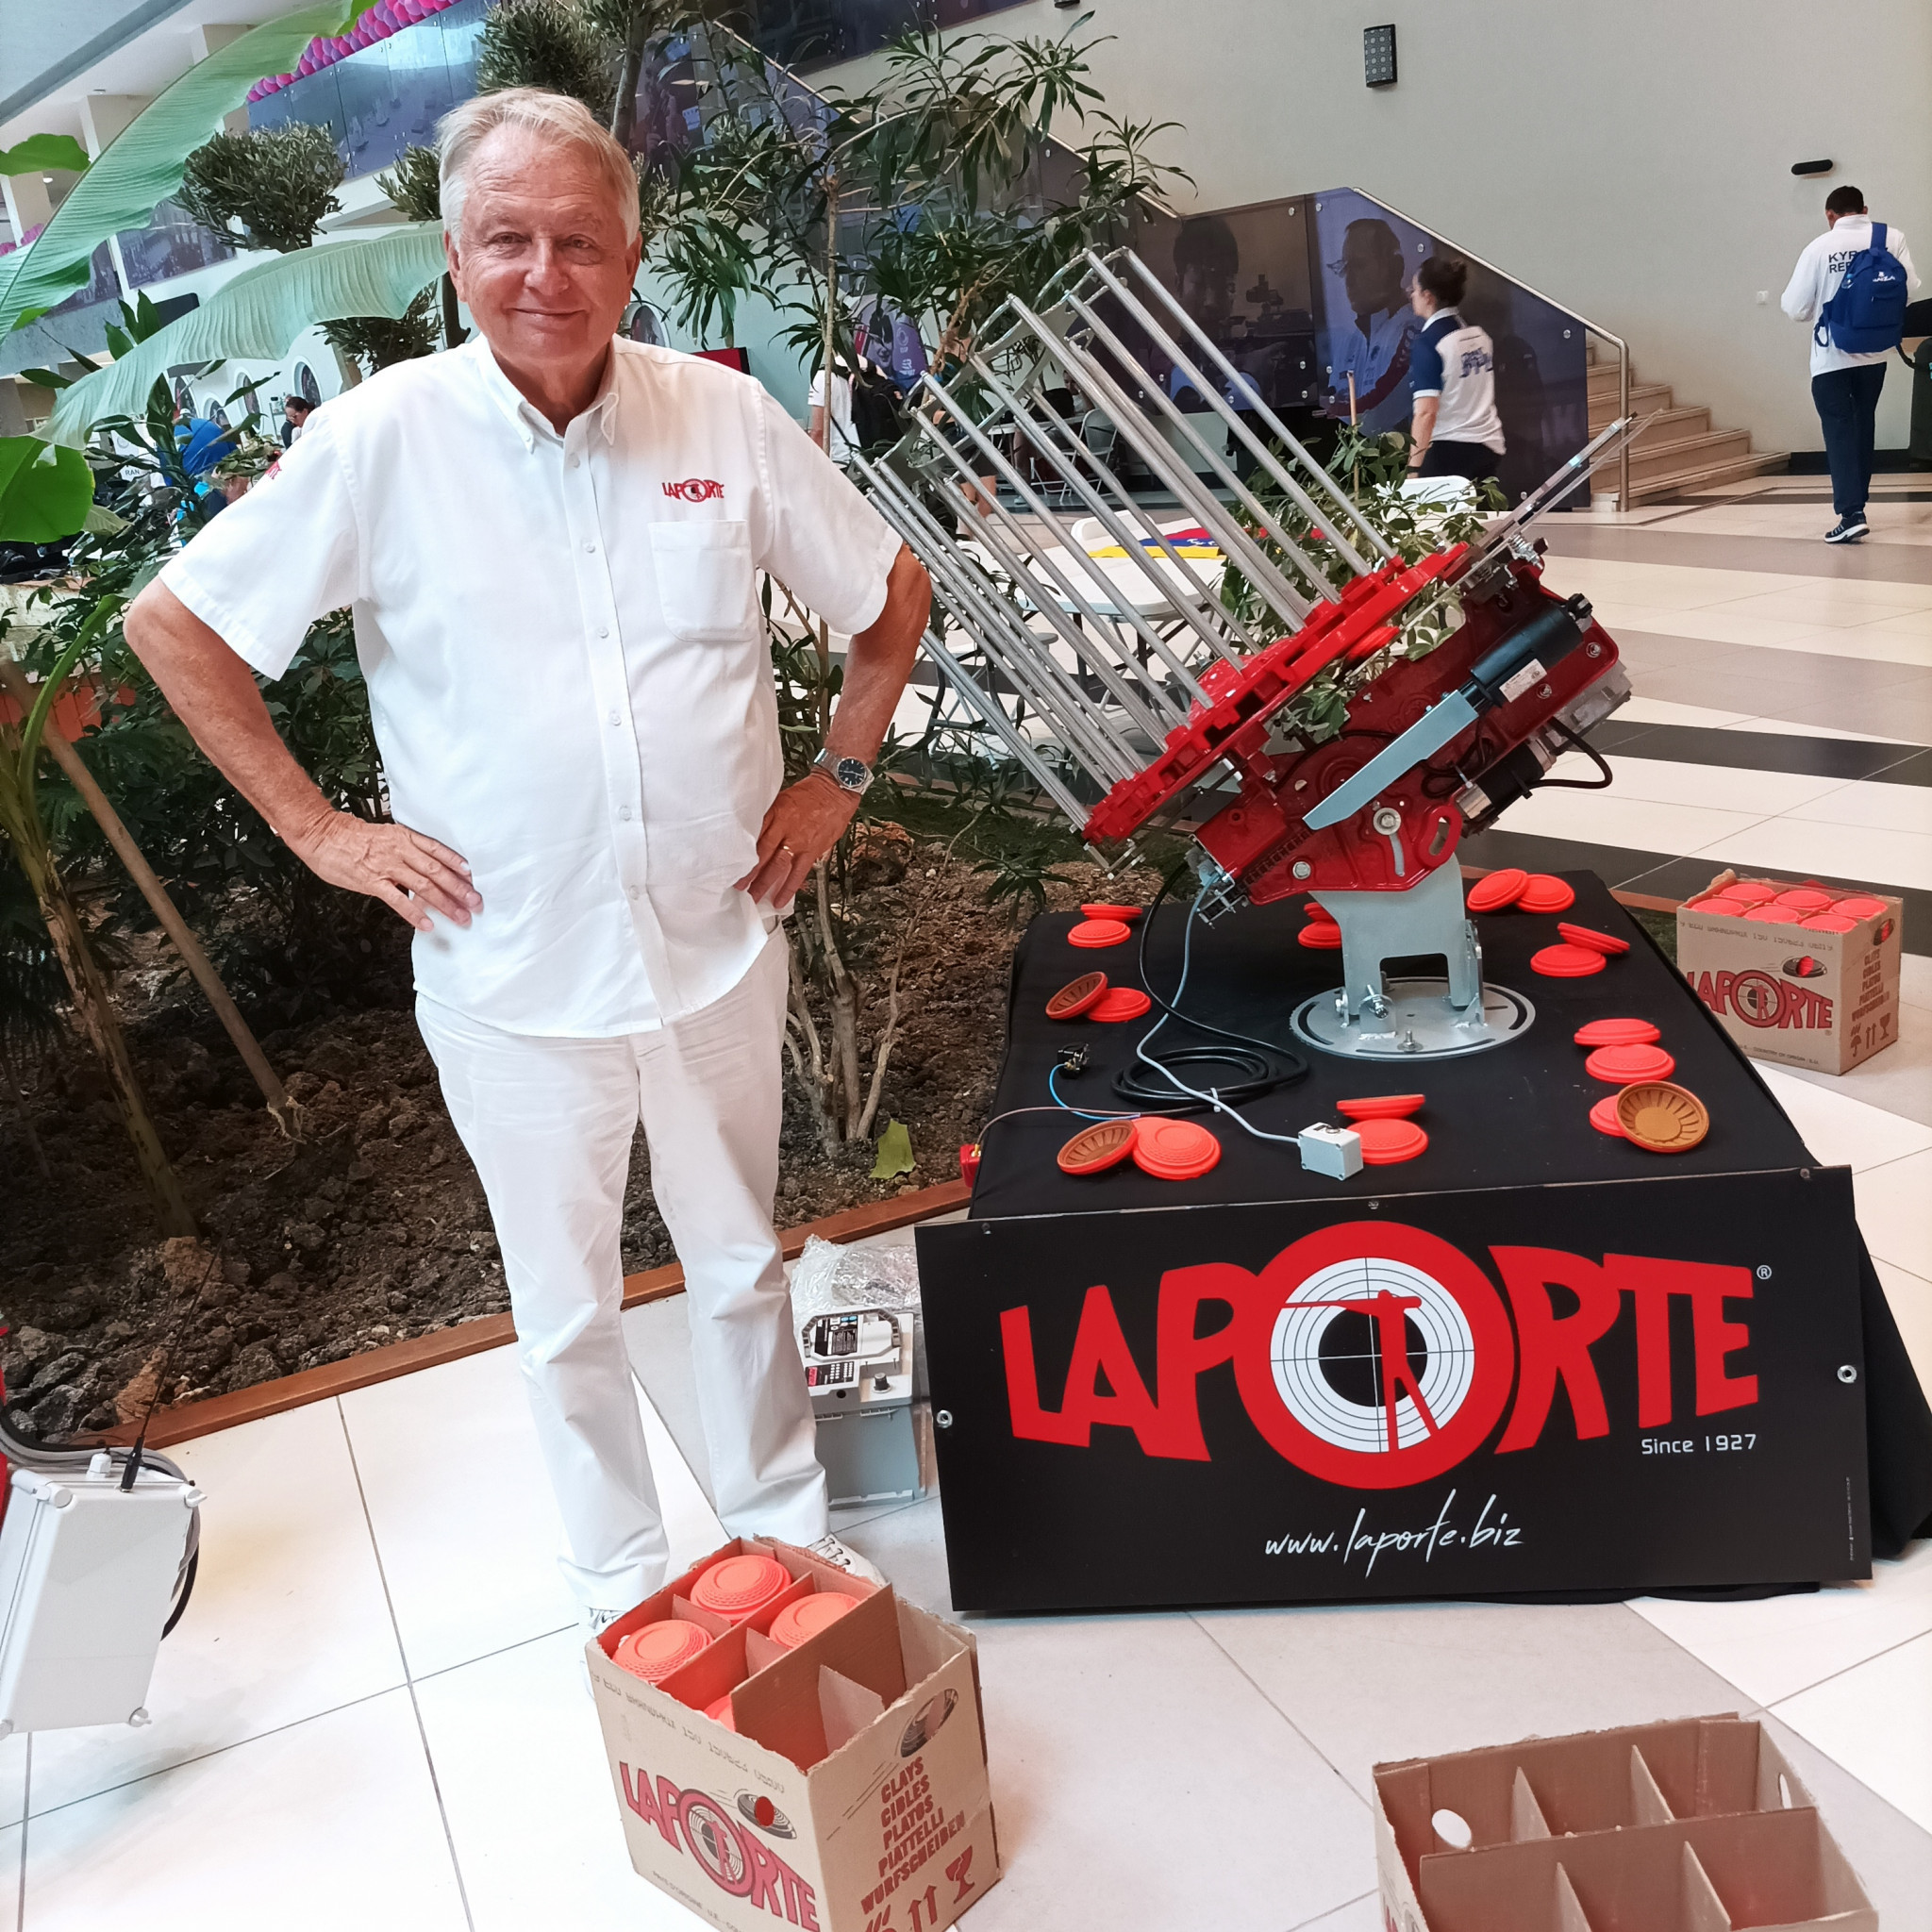 Laporte President Jean-Michel Laporte with clays and launching equipment at the ISSF World Championships in Baku ©ITG 